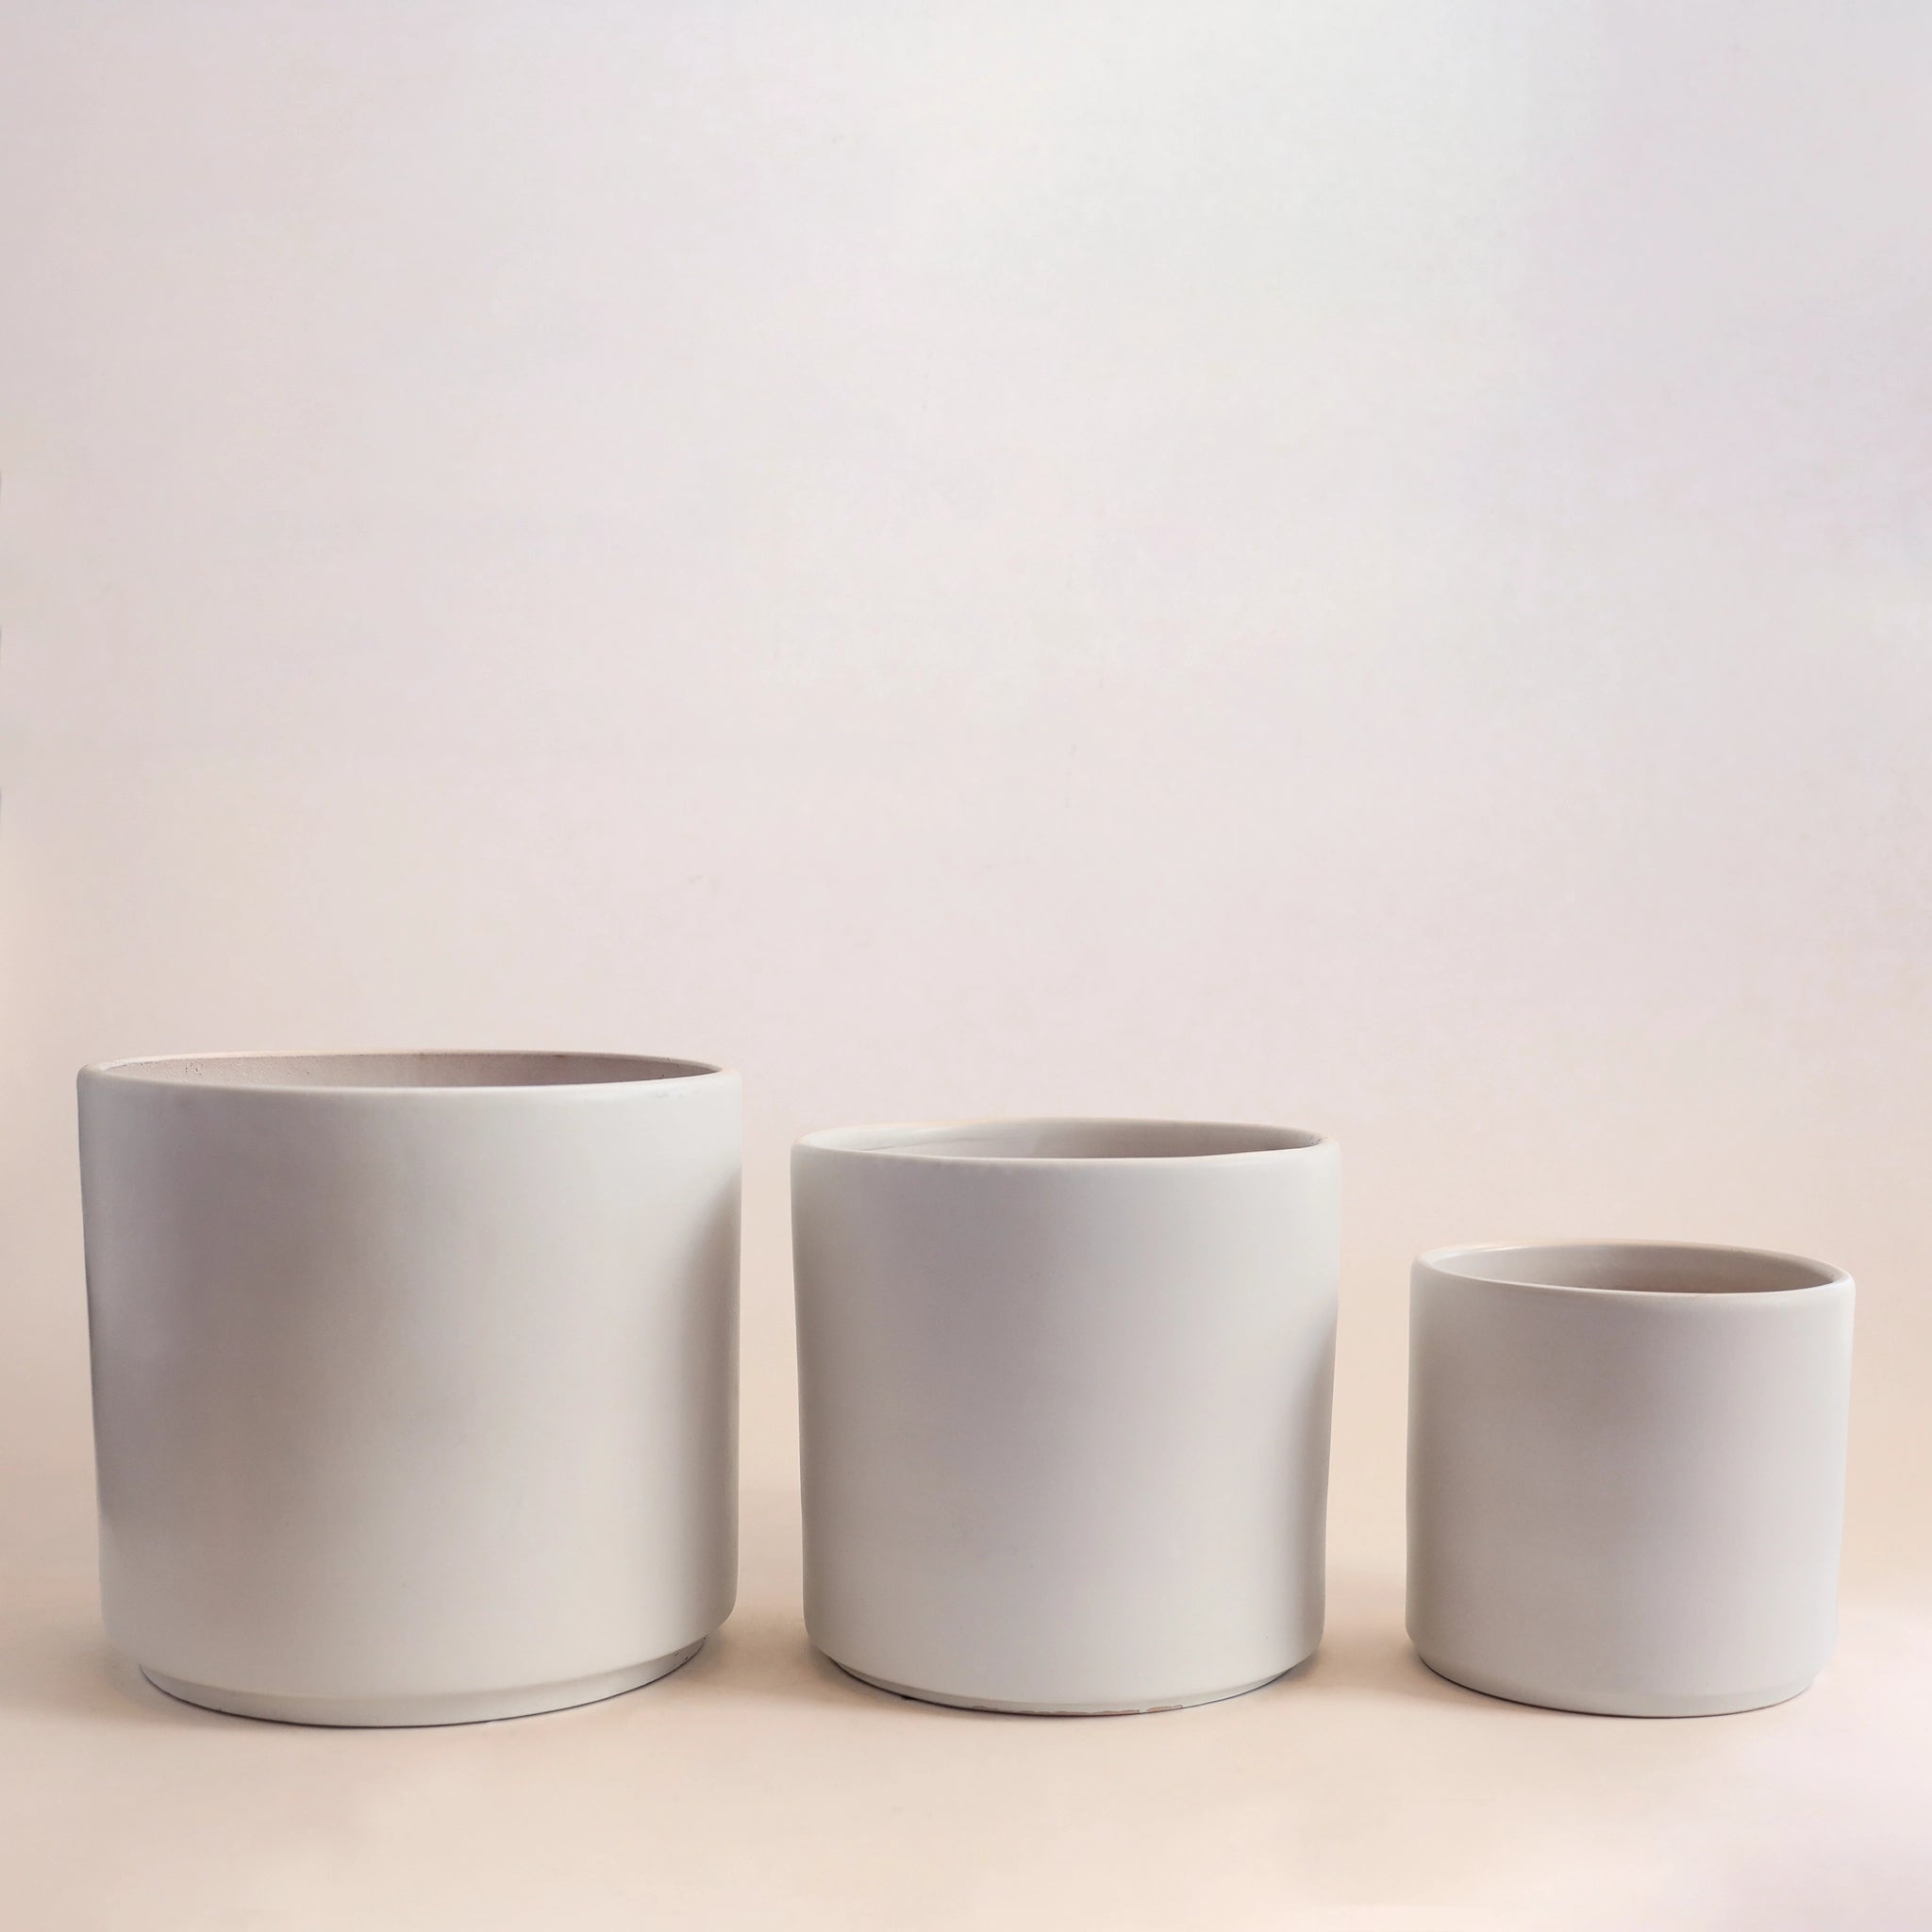 Three different sized white ceramic planters photographed in front of a white background. 